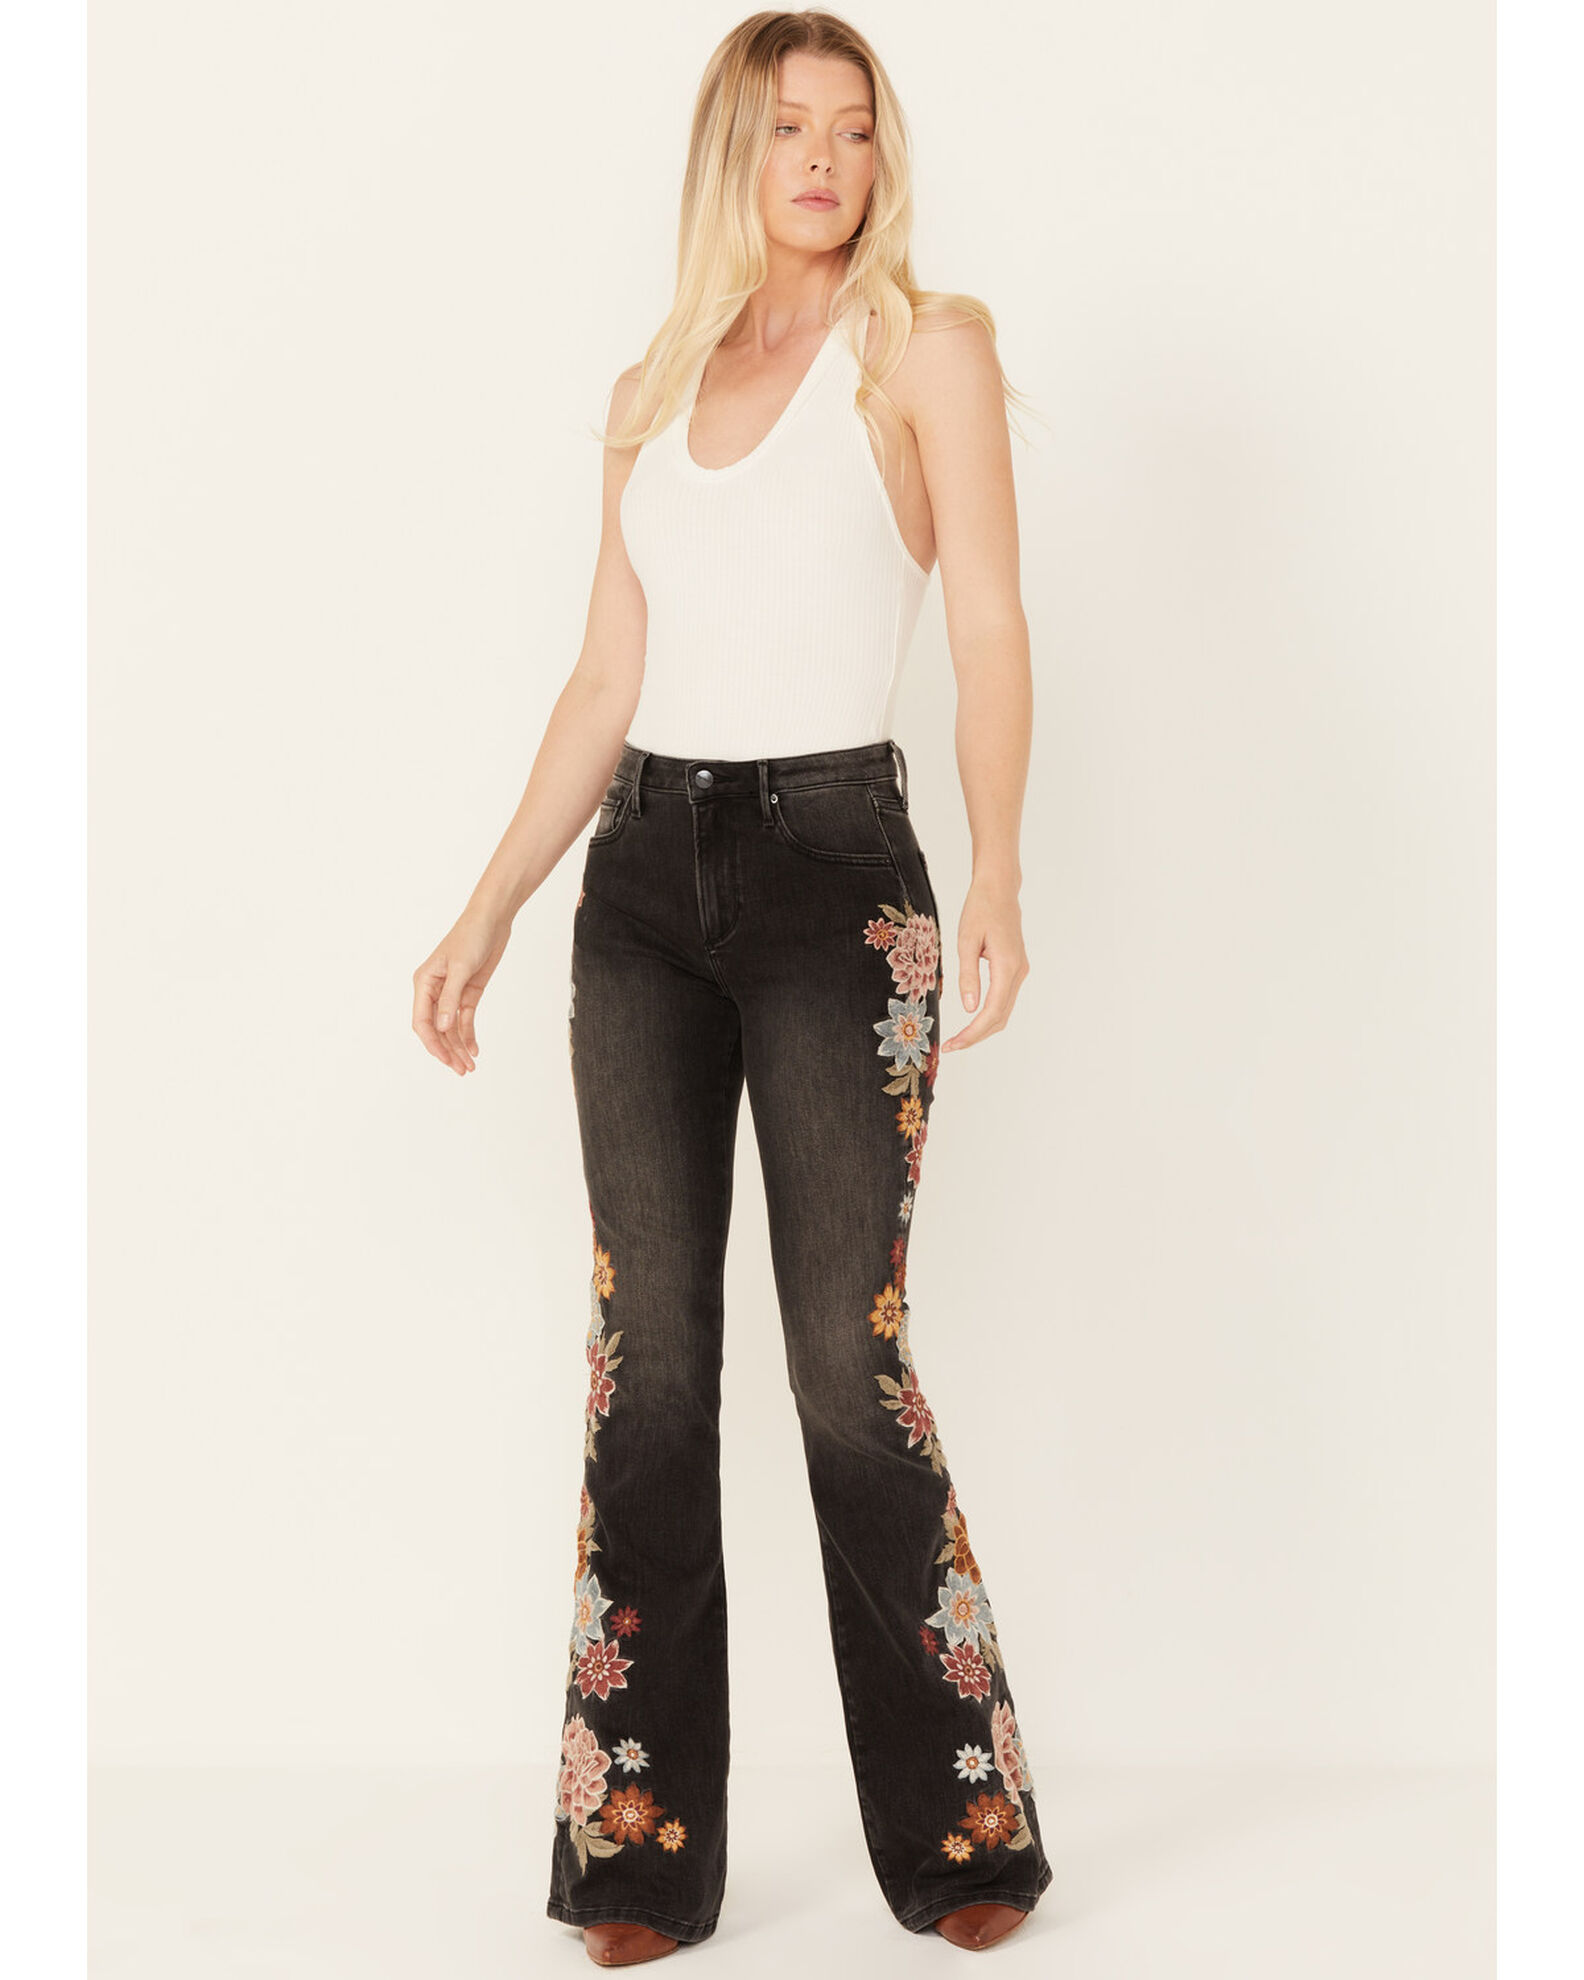 Driftwood Women's Medium Wash High Rise Floral Embroidered Stretch